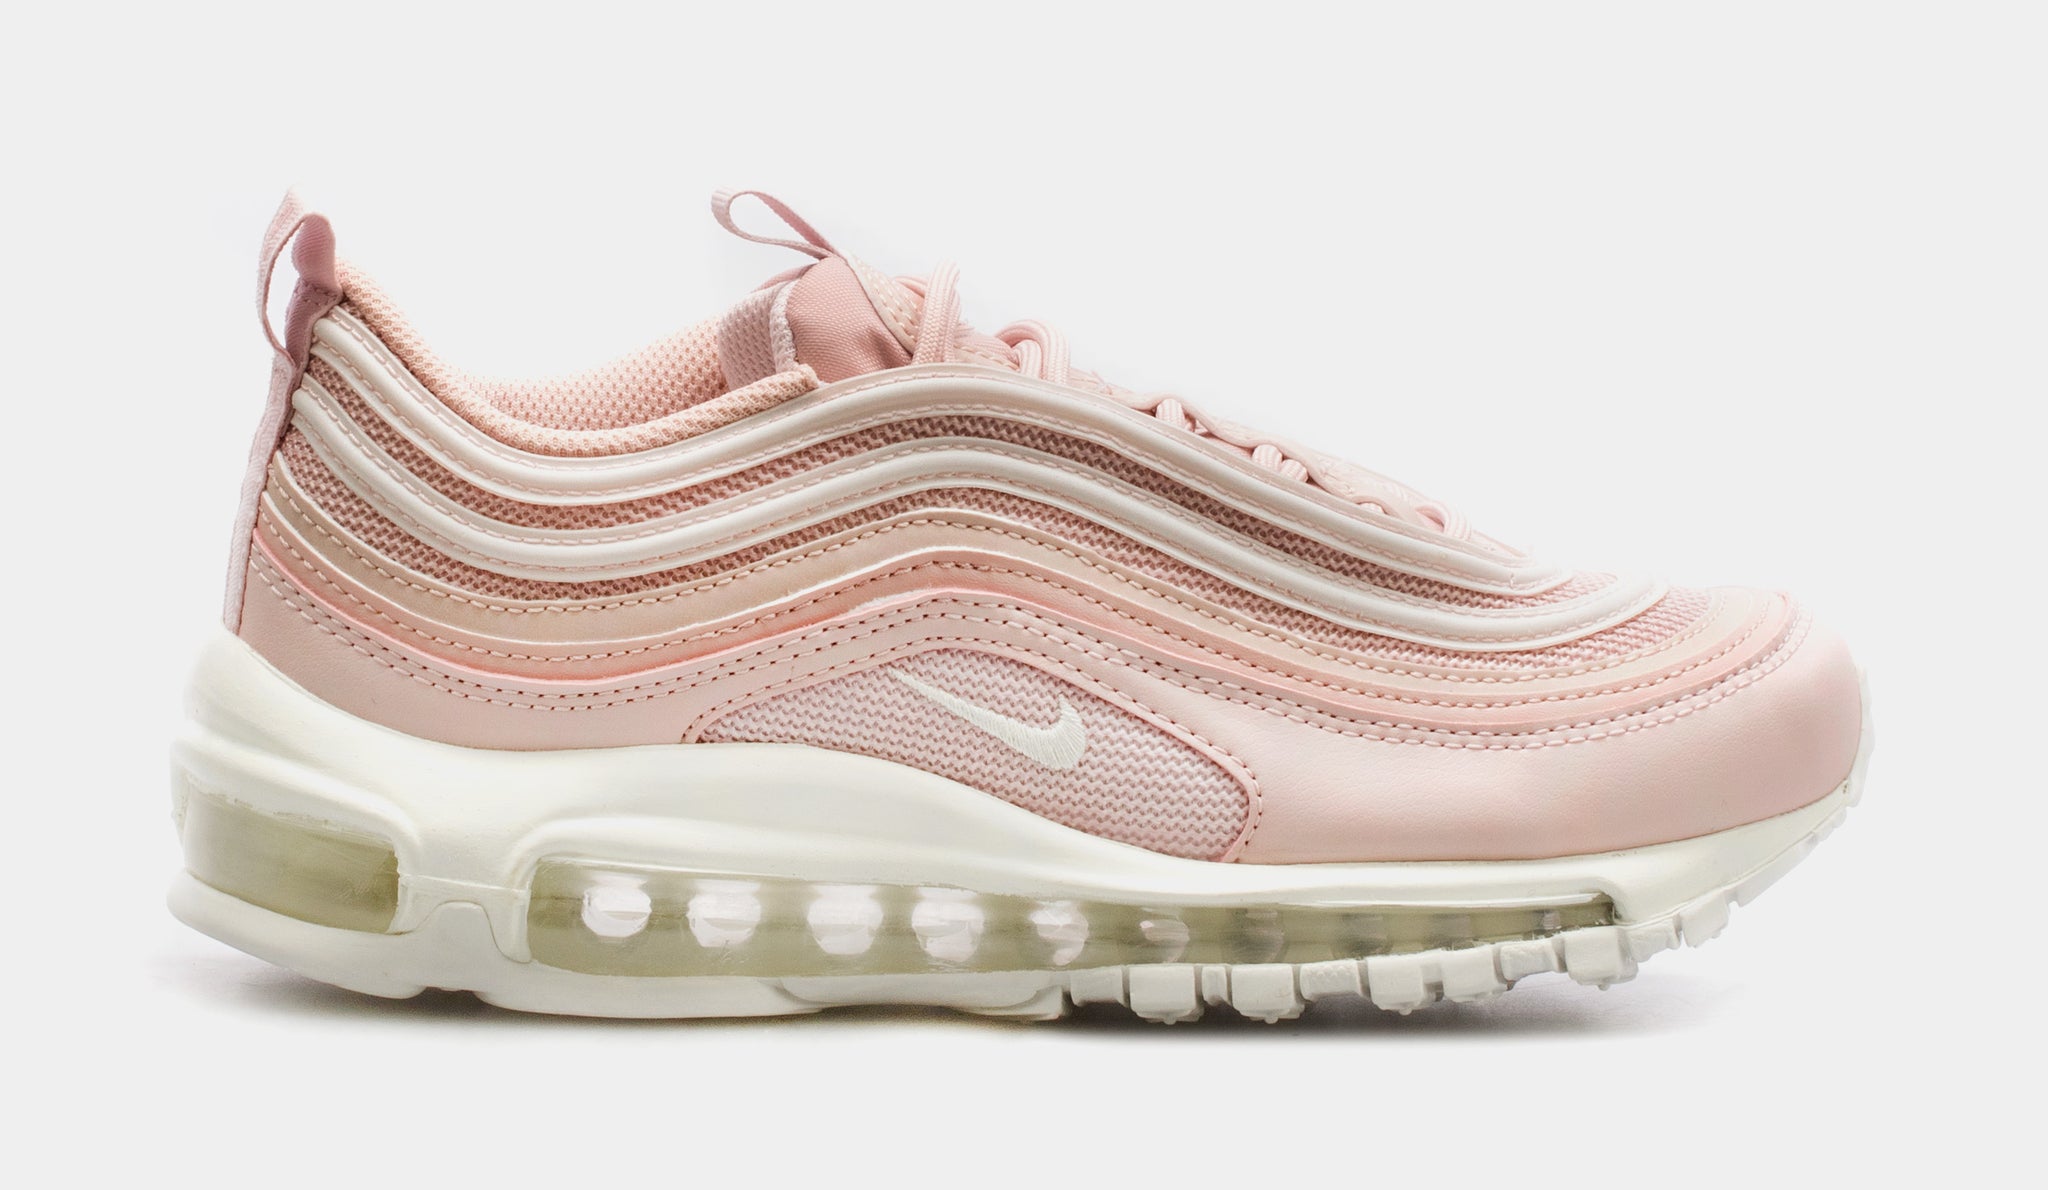 Nike Wmns Air Max 97 'Pink Oxford' | Women's Size 8